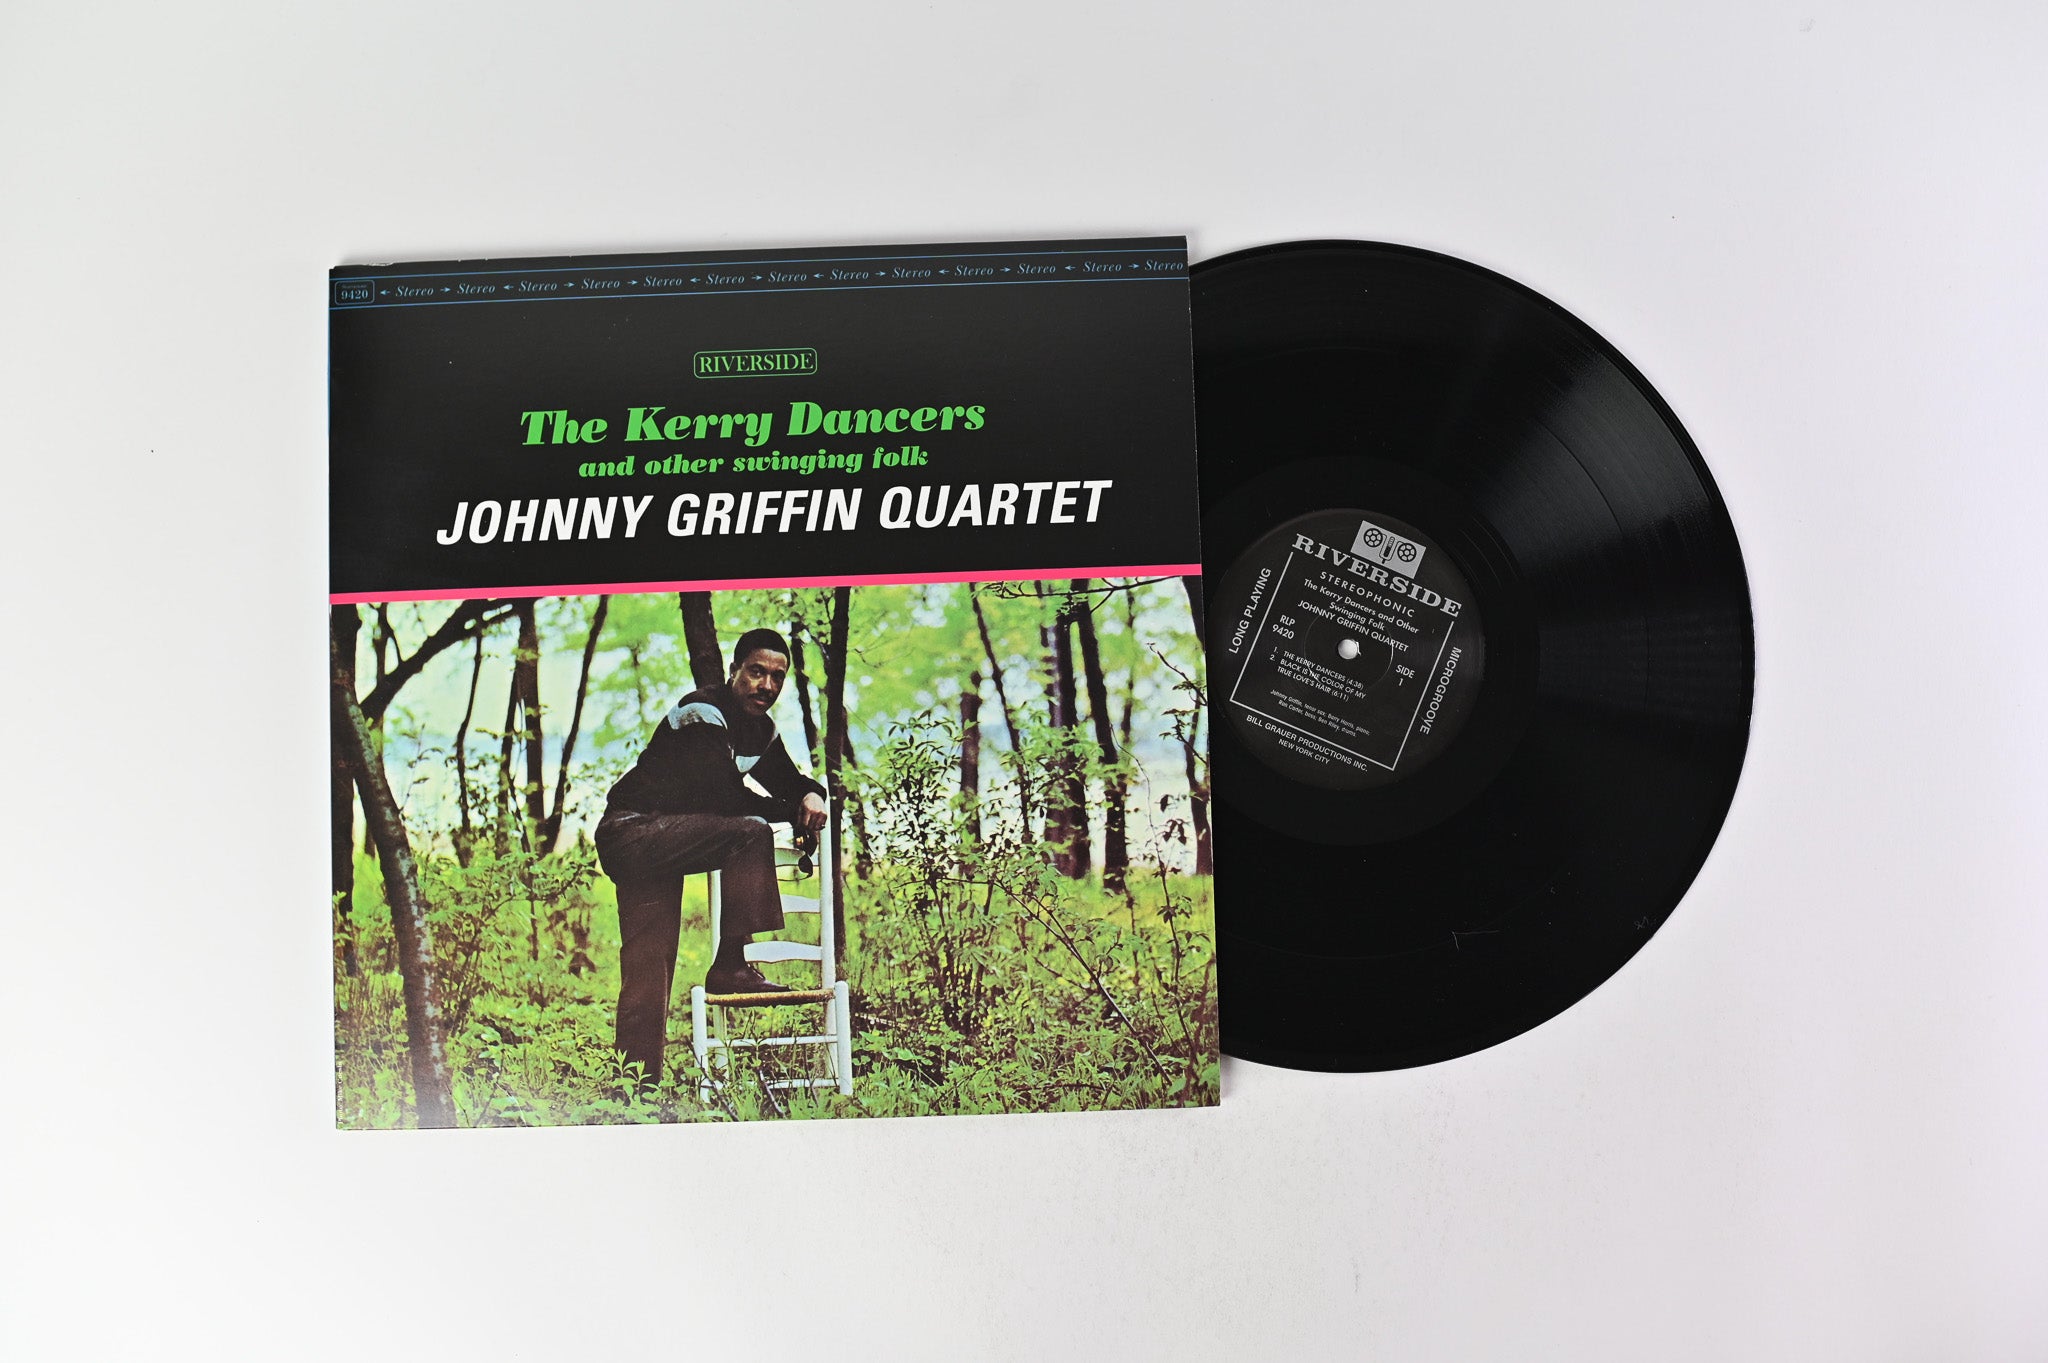 The Johnny Griffin Quartet - The Kerry Dancers on Analogue Productions 45 RPM